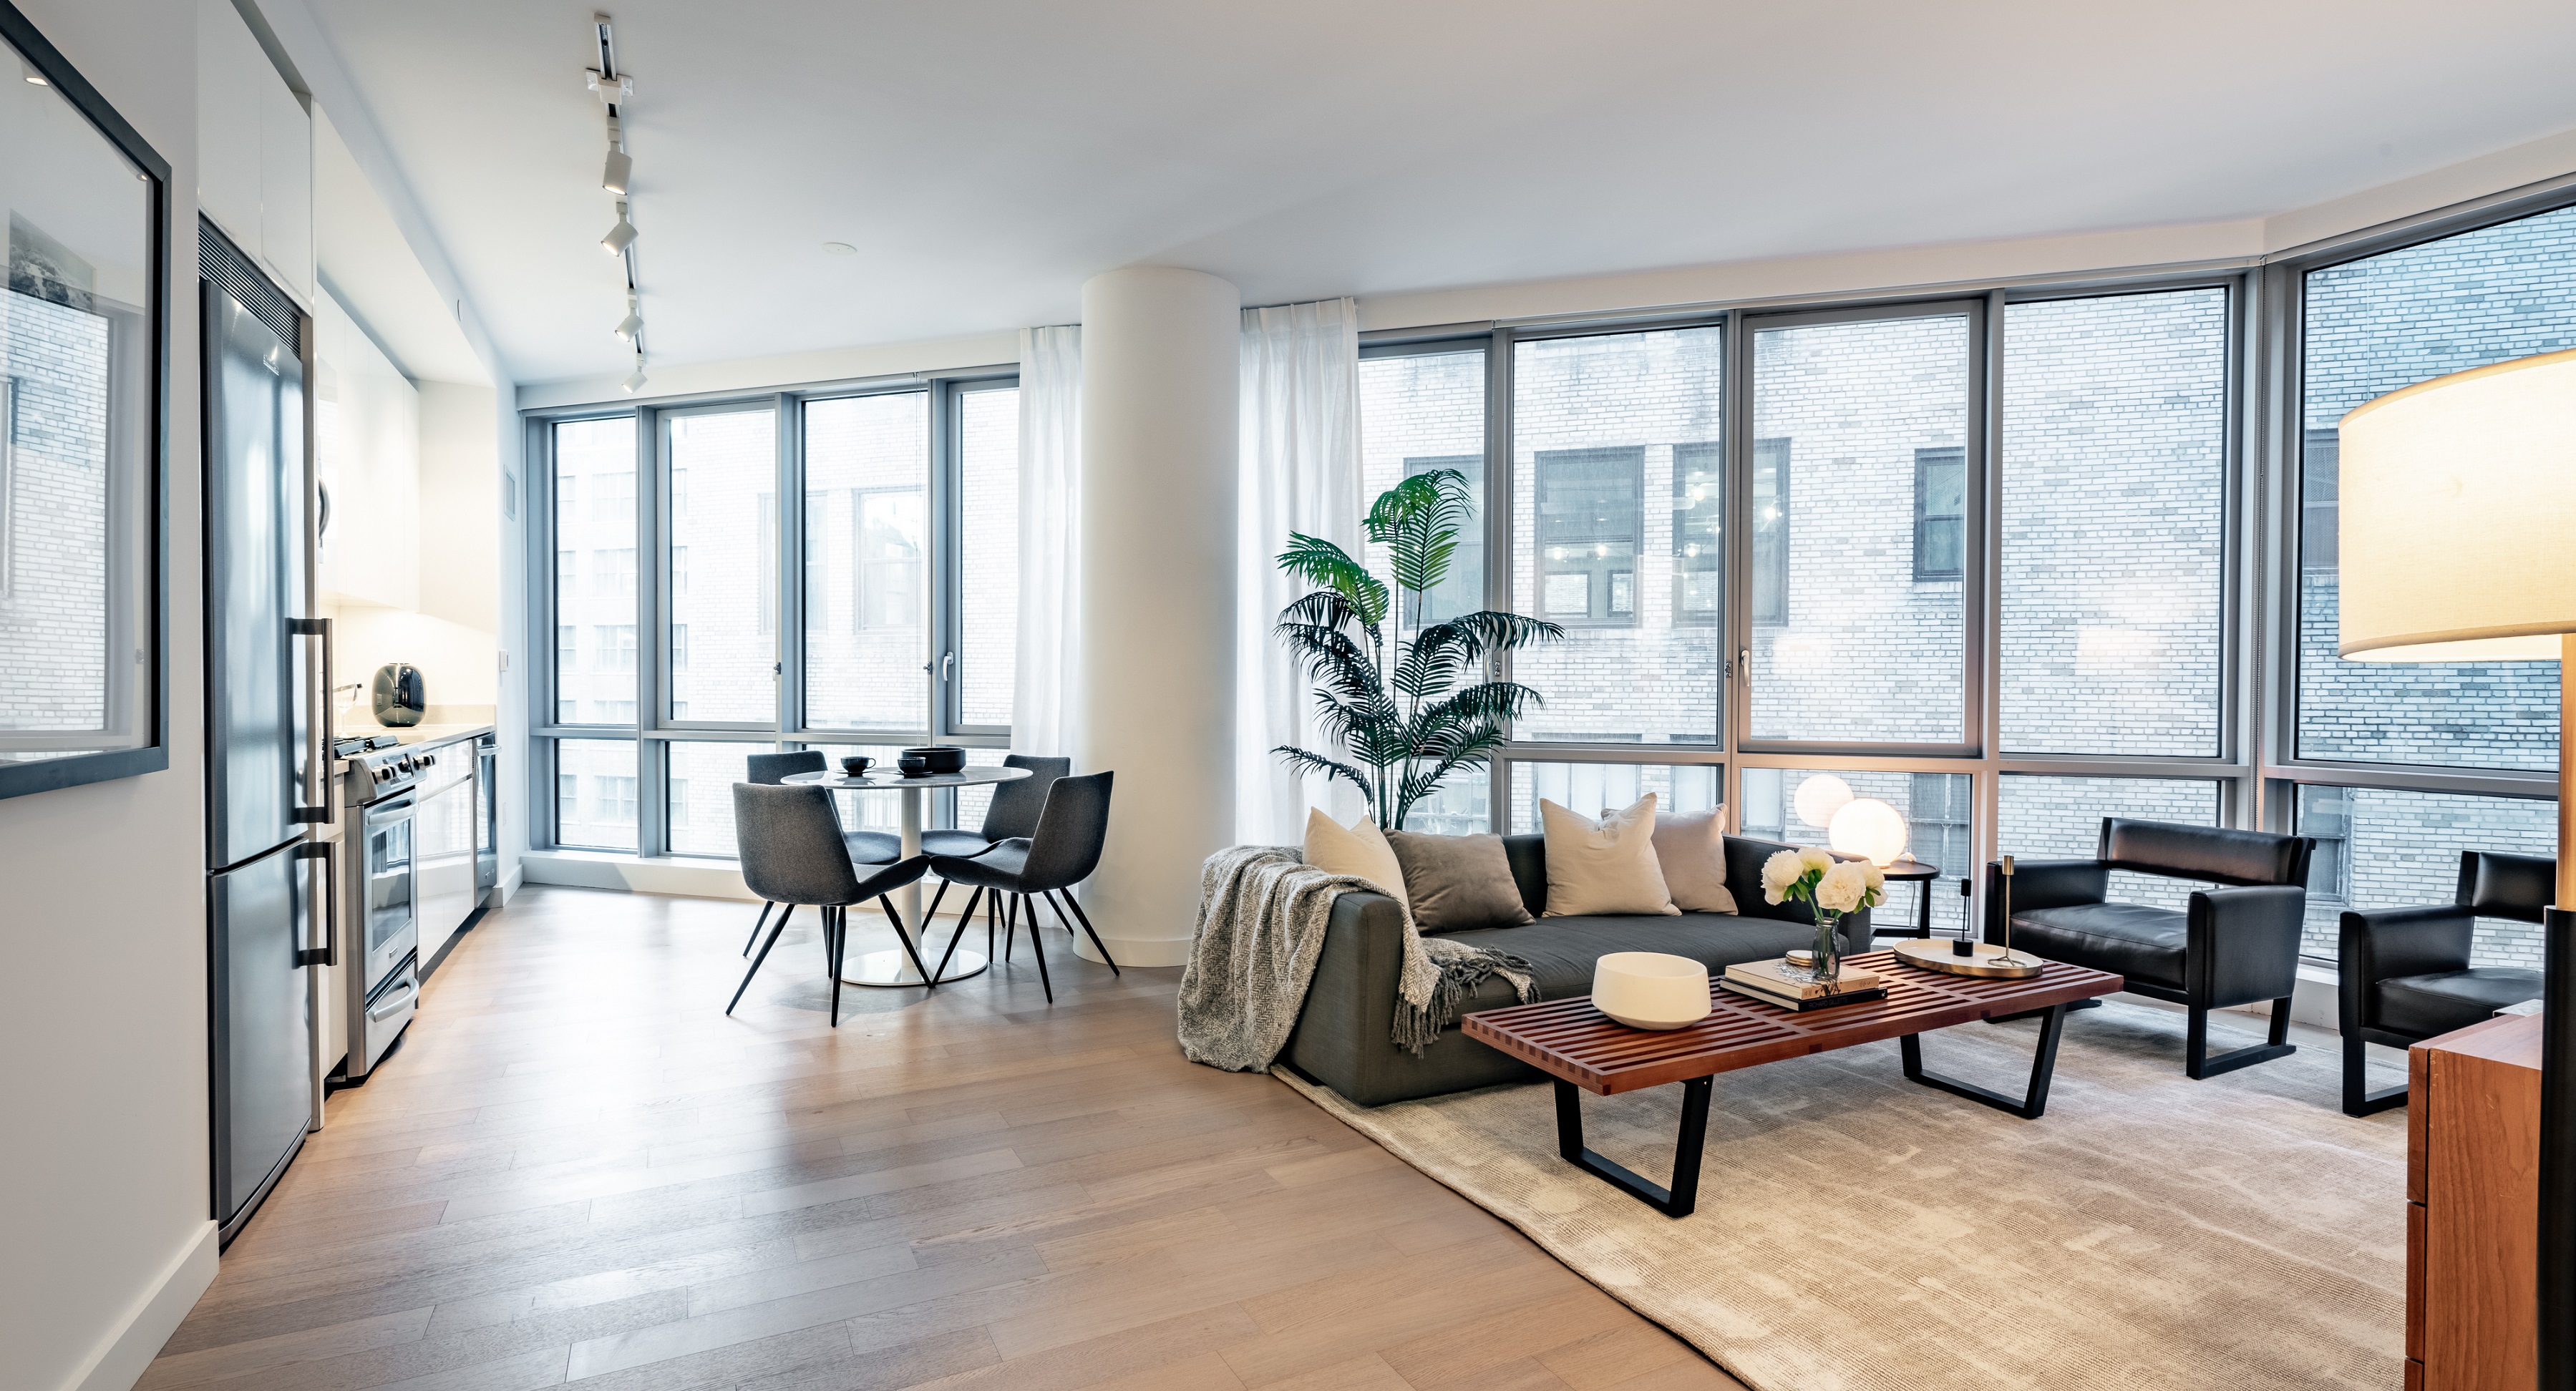 Each apartment is drenched in natural light with floor-to-ceiling windows and views of the NYC skyline.